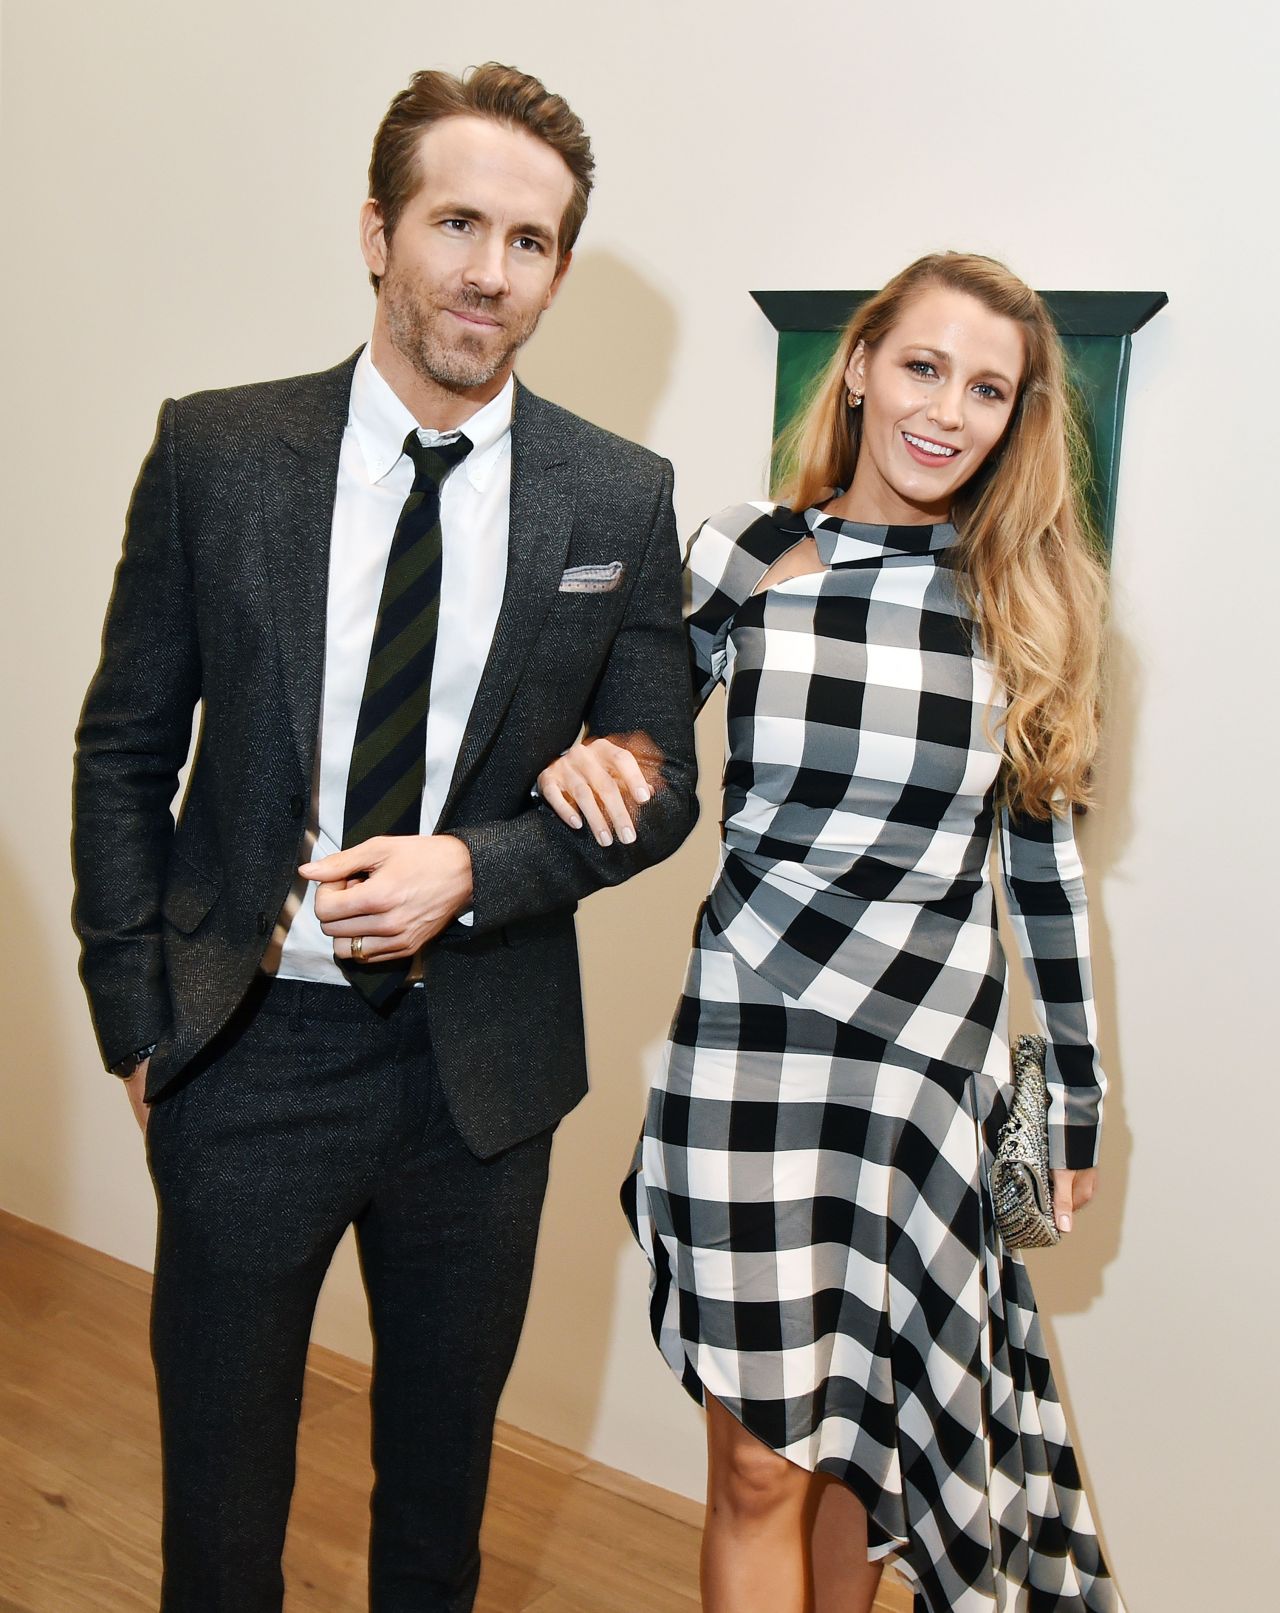 Blake Lively And Ryan Reynolds Final Portrait Screening After Party In New York City 